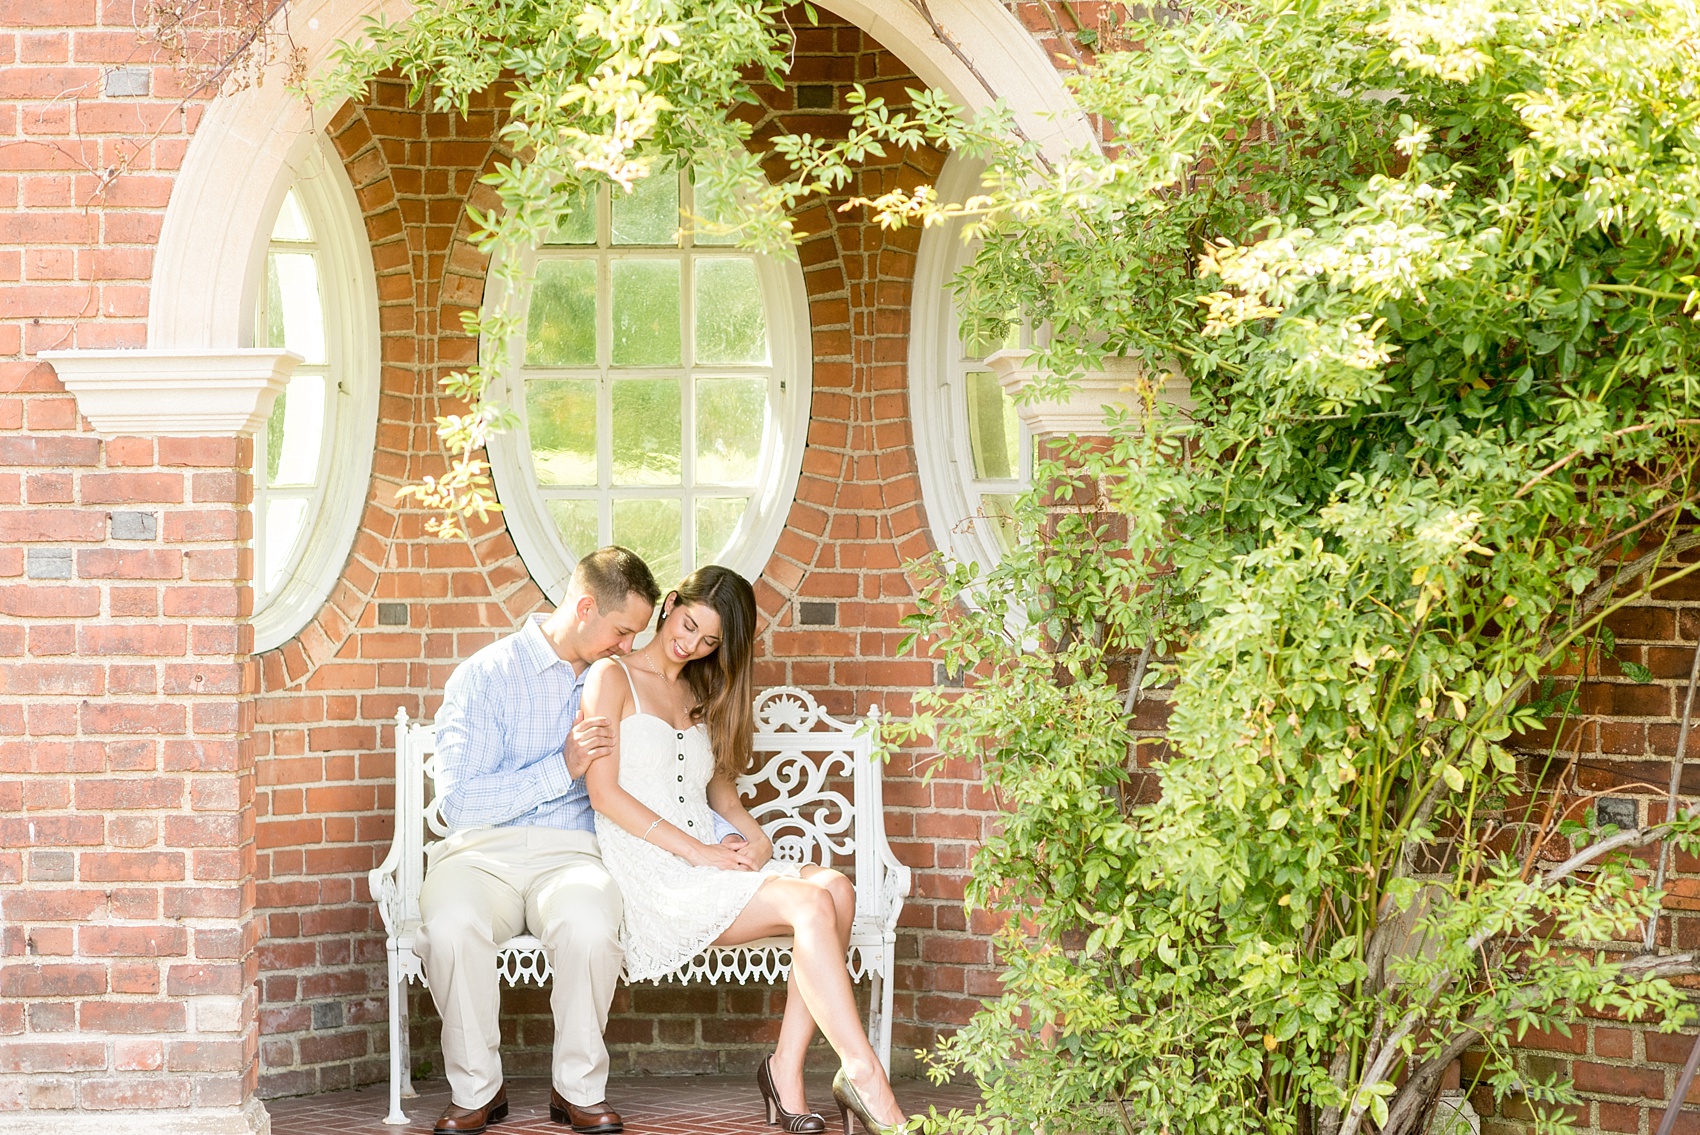 Mikkel Paige Photography photo of an Old Westbury Gardens engagement session on Long Island.